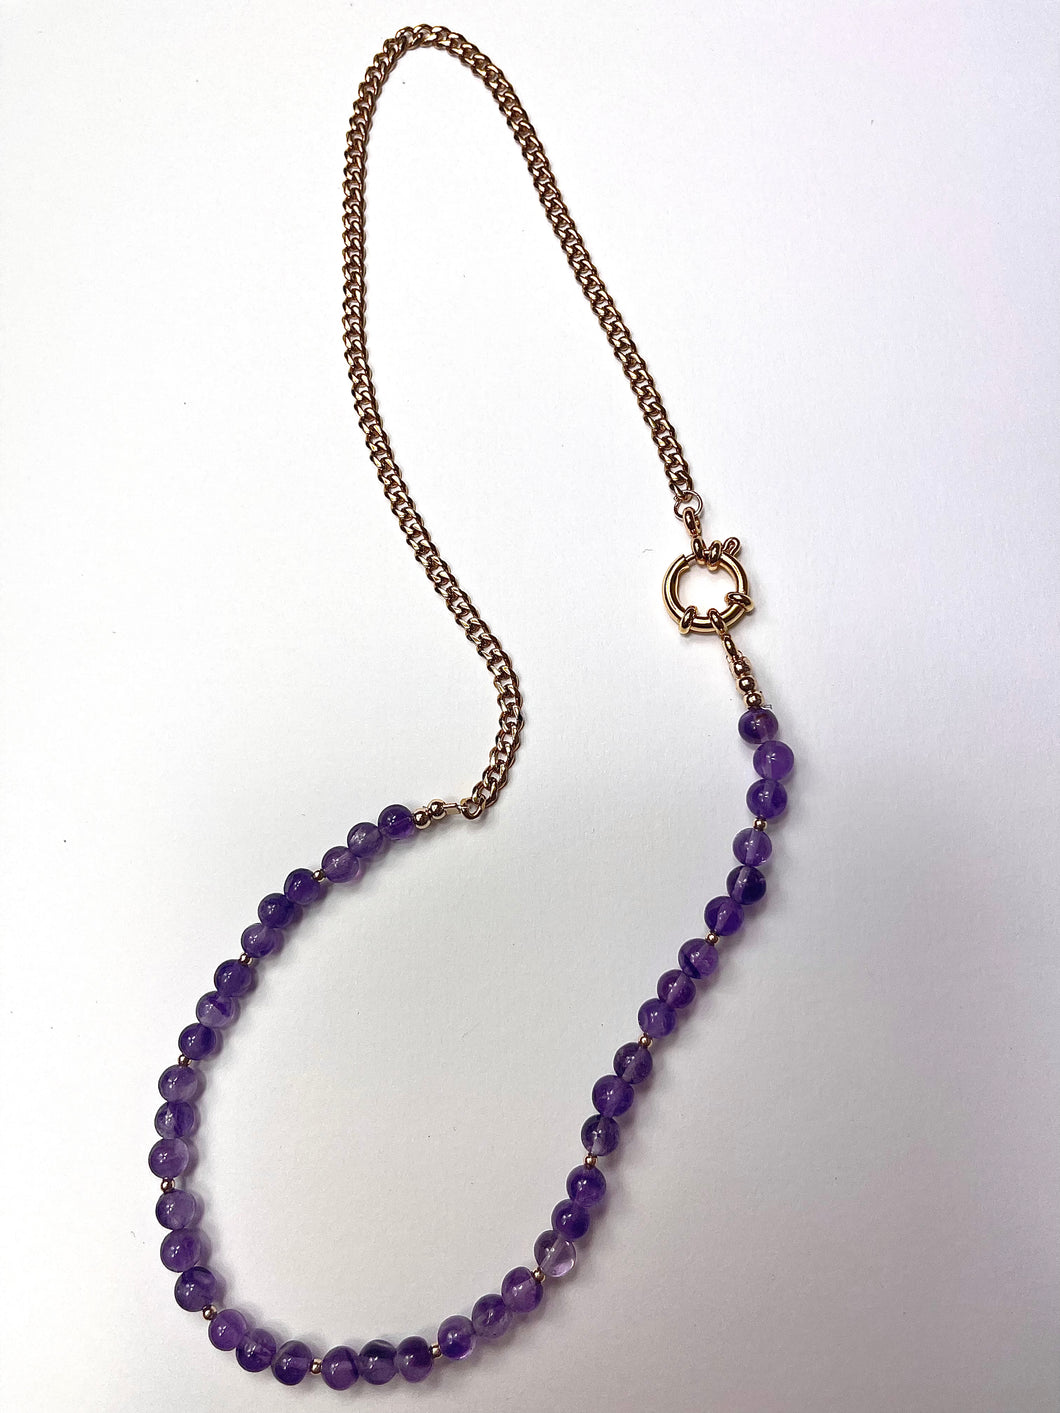 Amethyst 14K Plated Necklace - Made to order